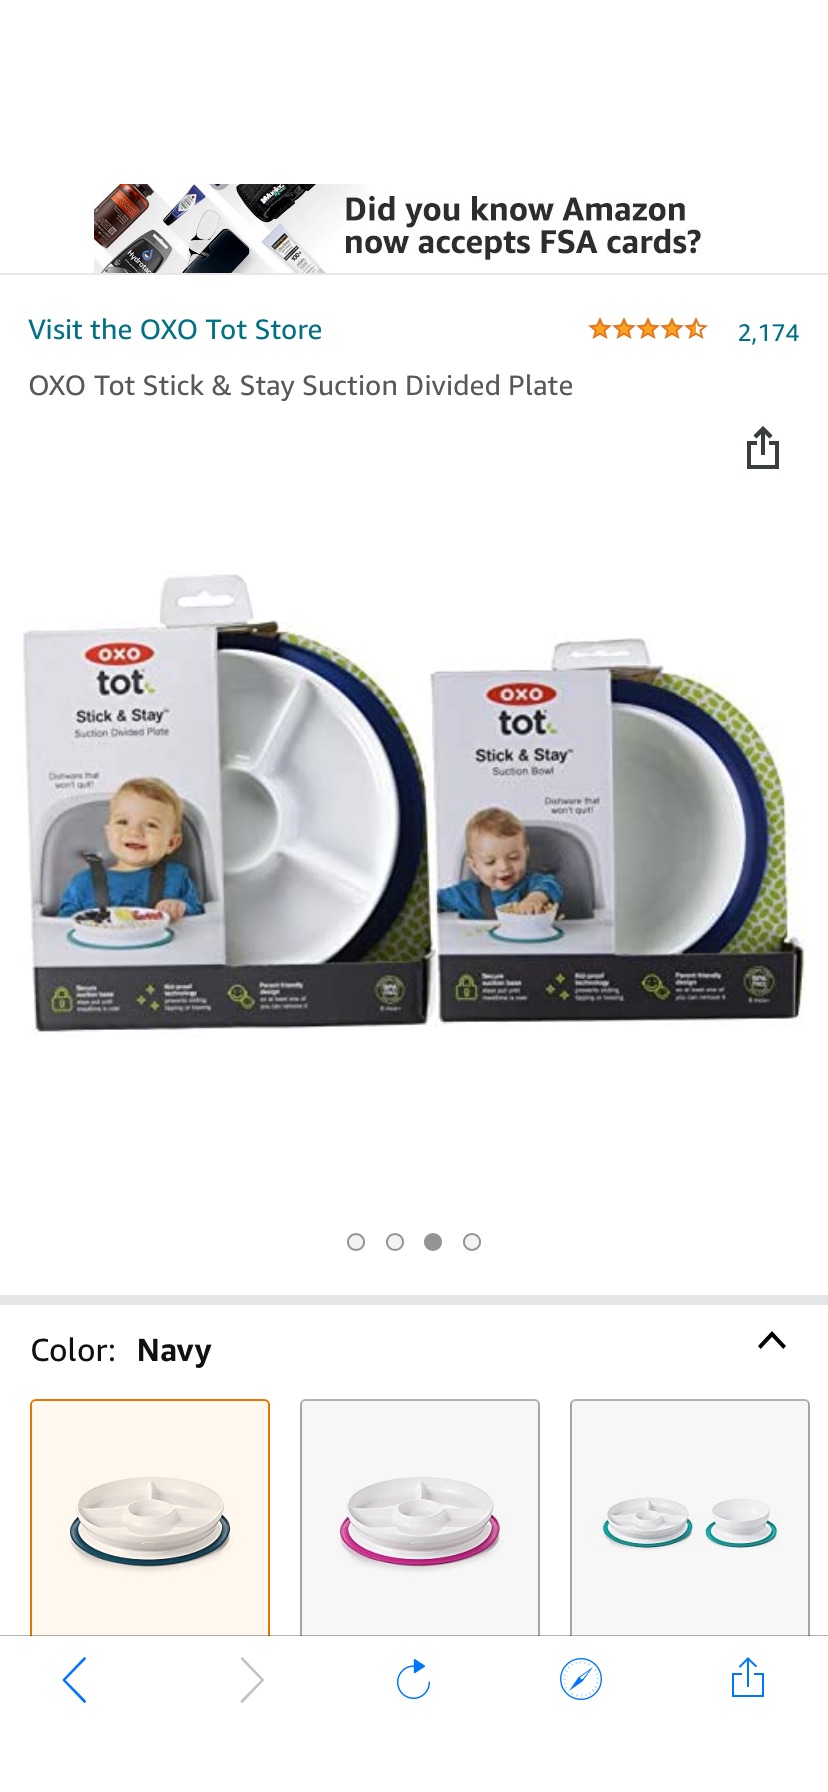 Amazon.com : OXO Tot Stick & Stay Suction Divided Plate- Teal : Baby吸盘和吸碗套装